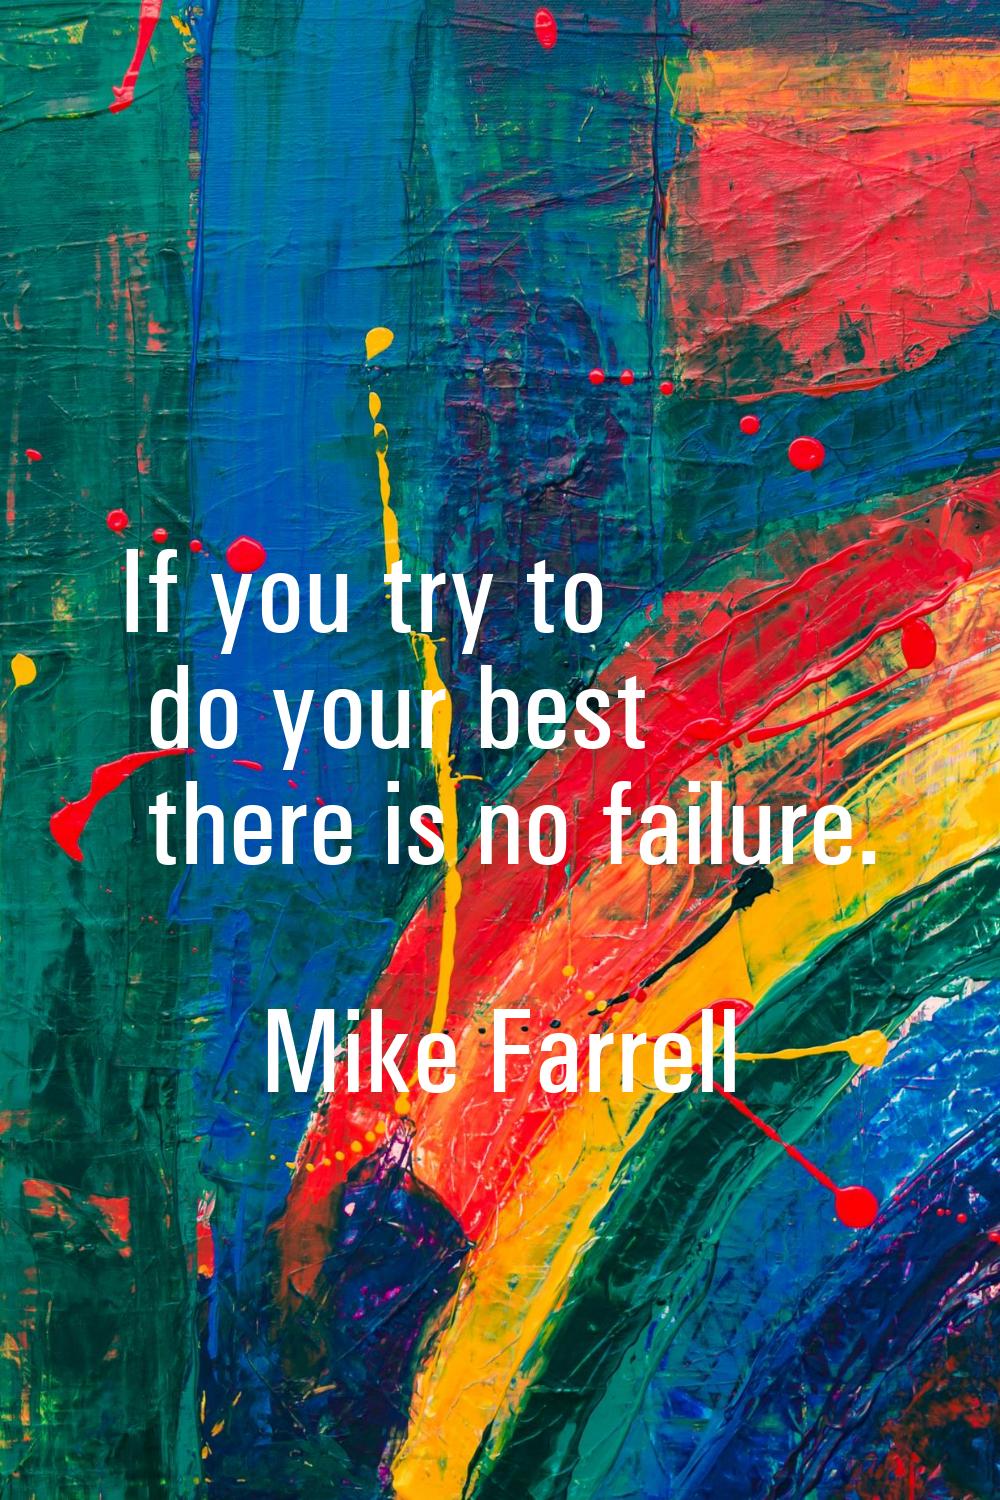 If you try to do your best there is no failure.